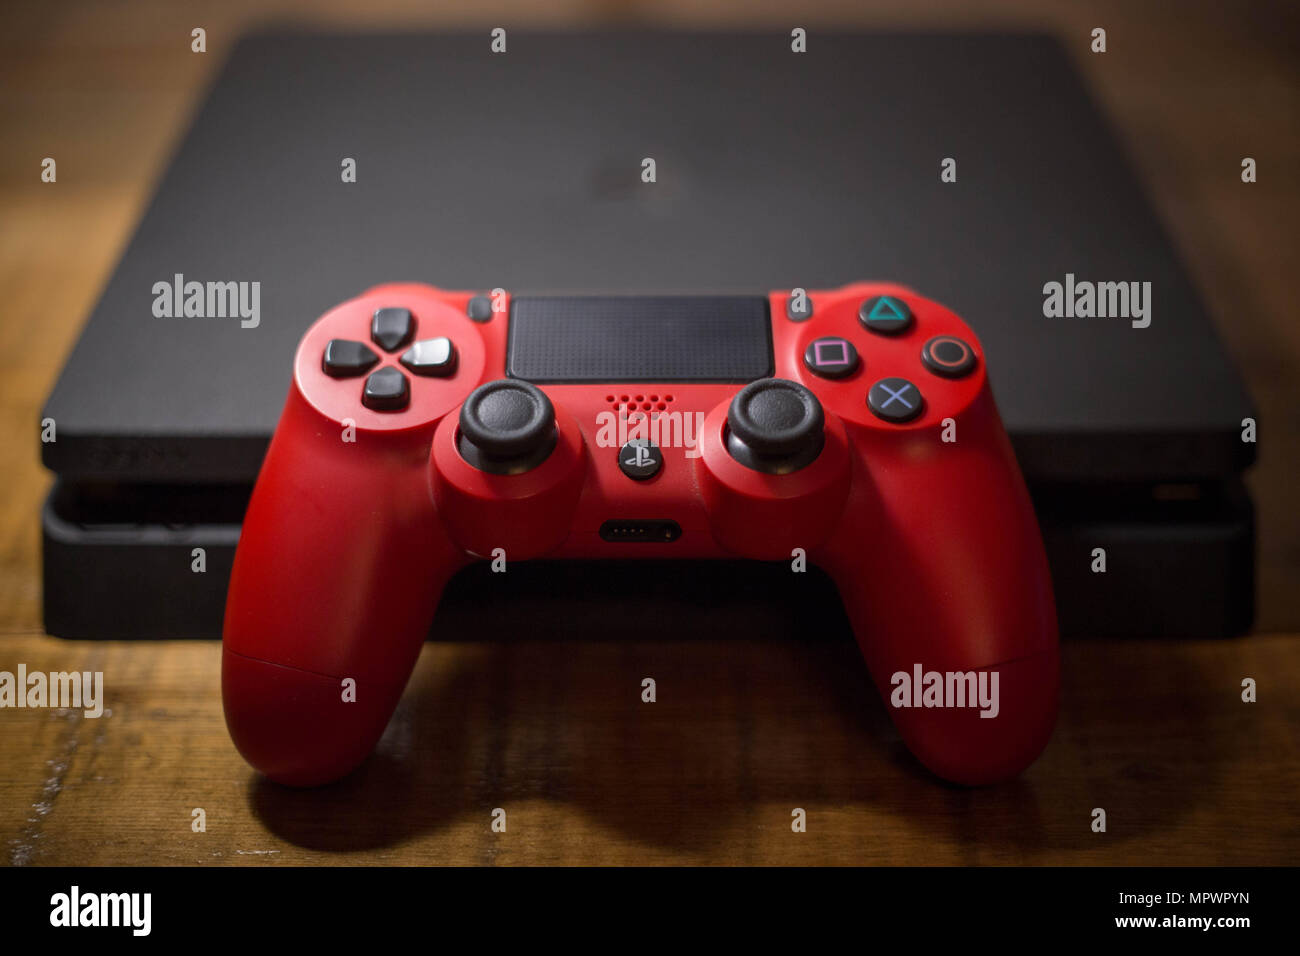 A Sony PlayStation 4 video game console with a red wireless controller next to it. The PlayStation 4 or PS4 is knows as the eighth generation of home video game console developed by the Japanese company Sony Interactive Entertainment. The console sold for about 74 million units since it was released in November 2013. Stock Photo